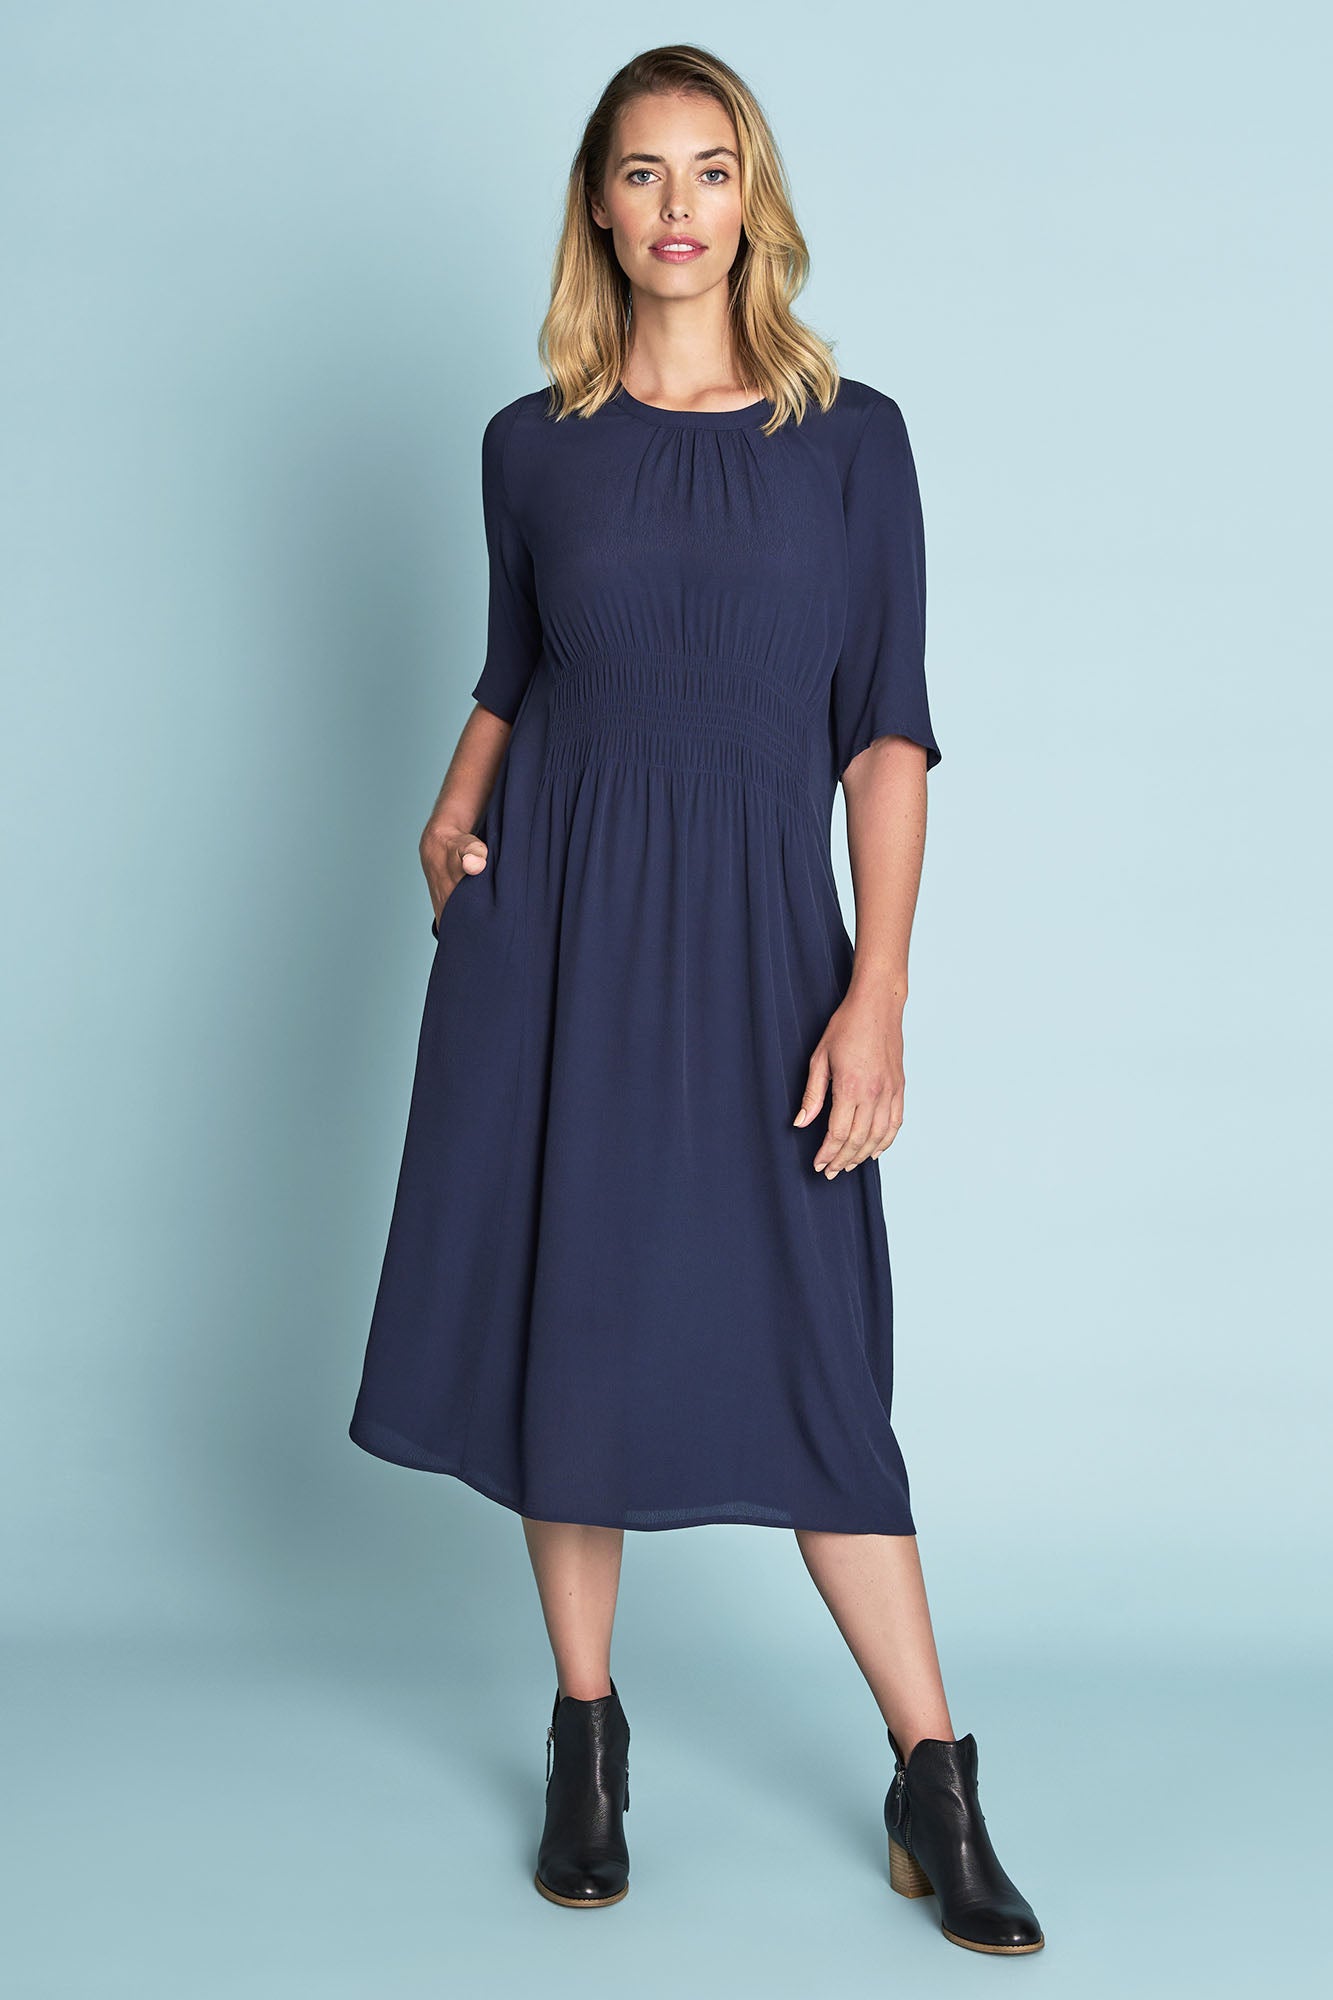 Ruched Detail Dress – Blue Illusion